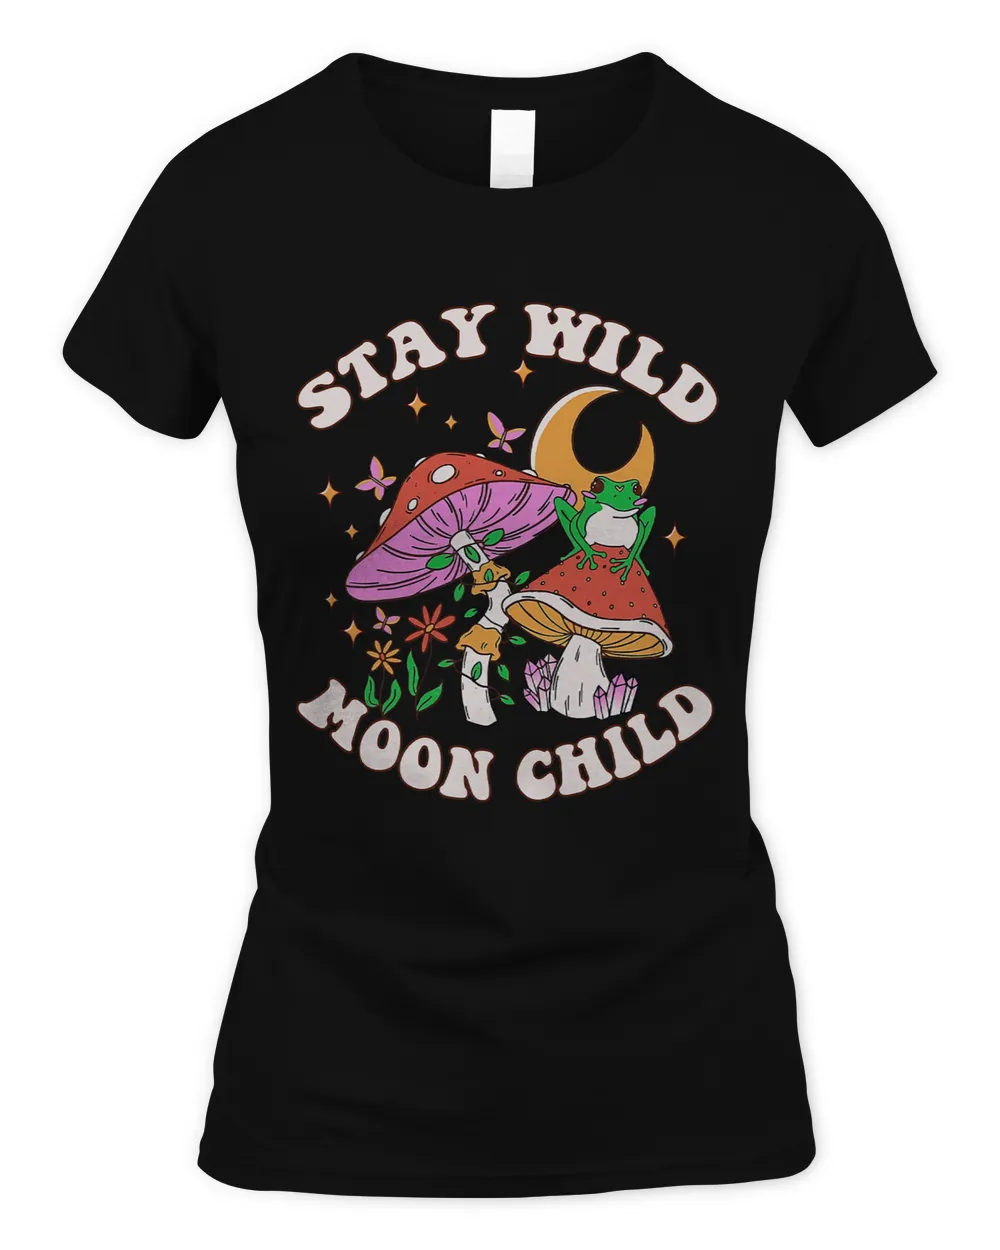 Retro Stay Wild Moon Child Frog Mushroom outfit